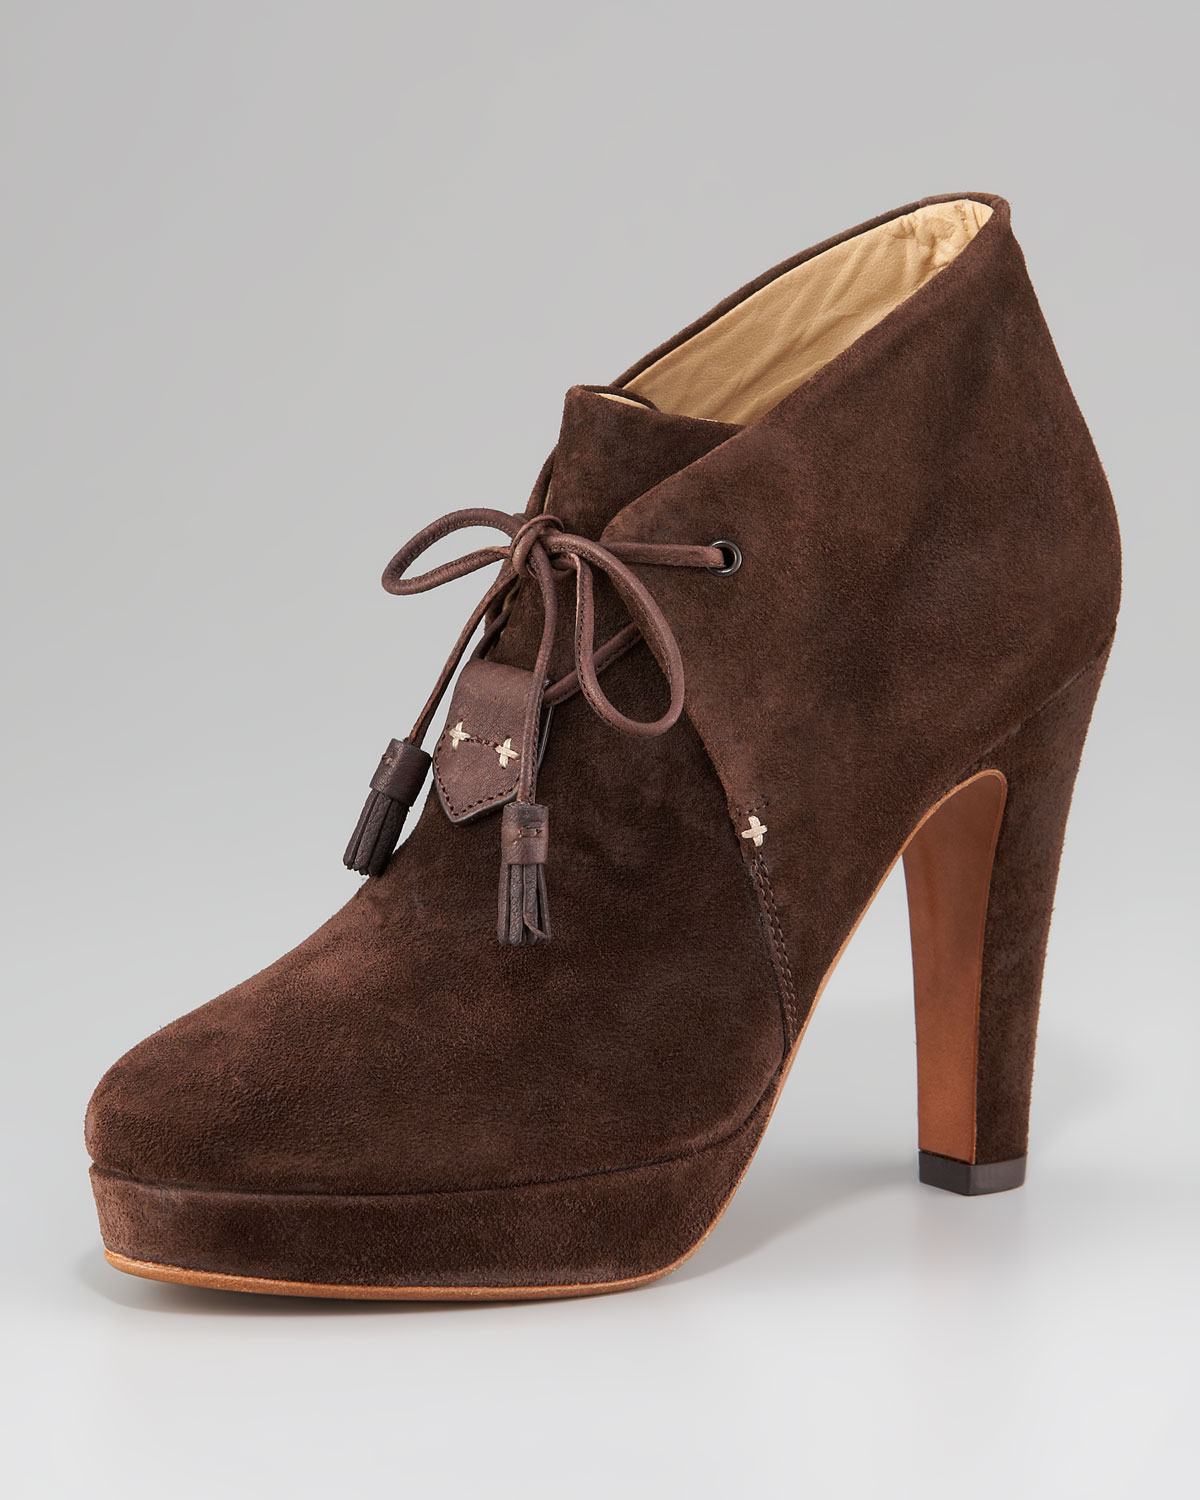 Rag & bone Lace-up Suede Bootie in Brown | Lyst